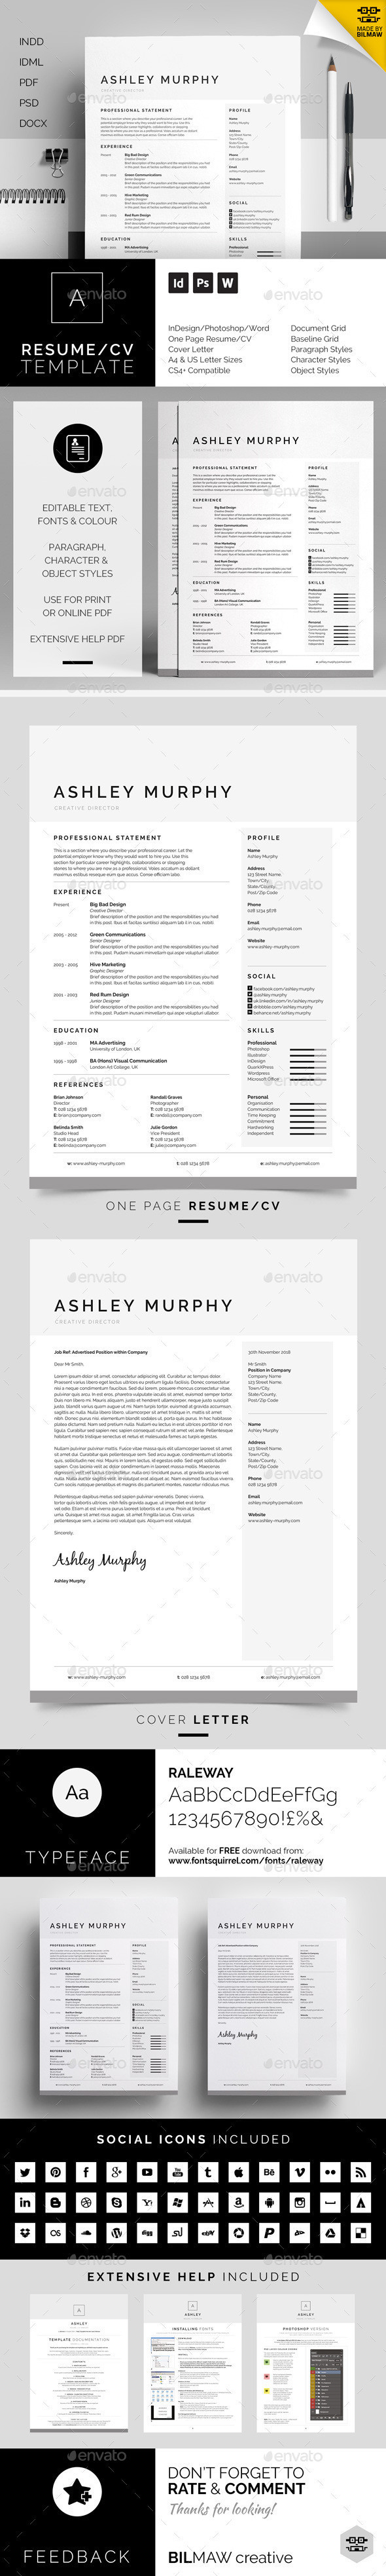 Resume ashley preview